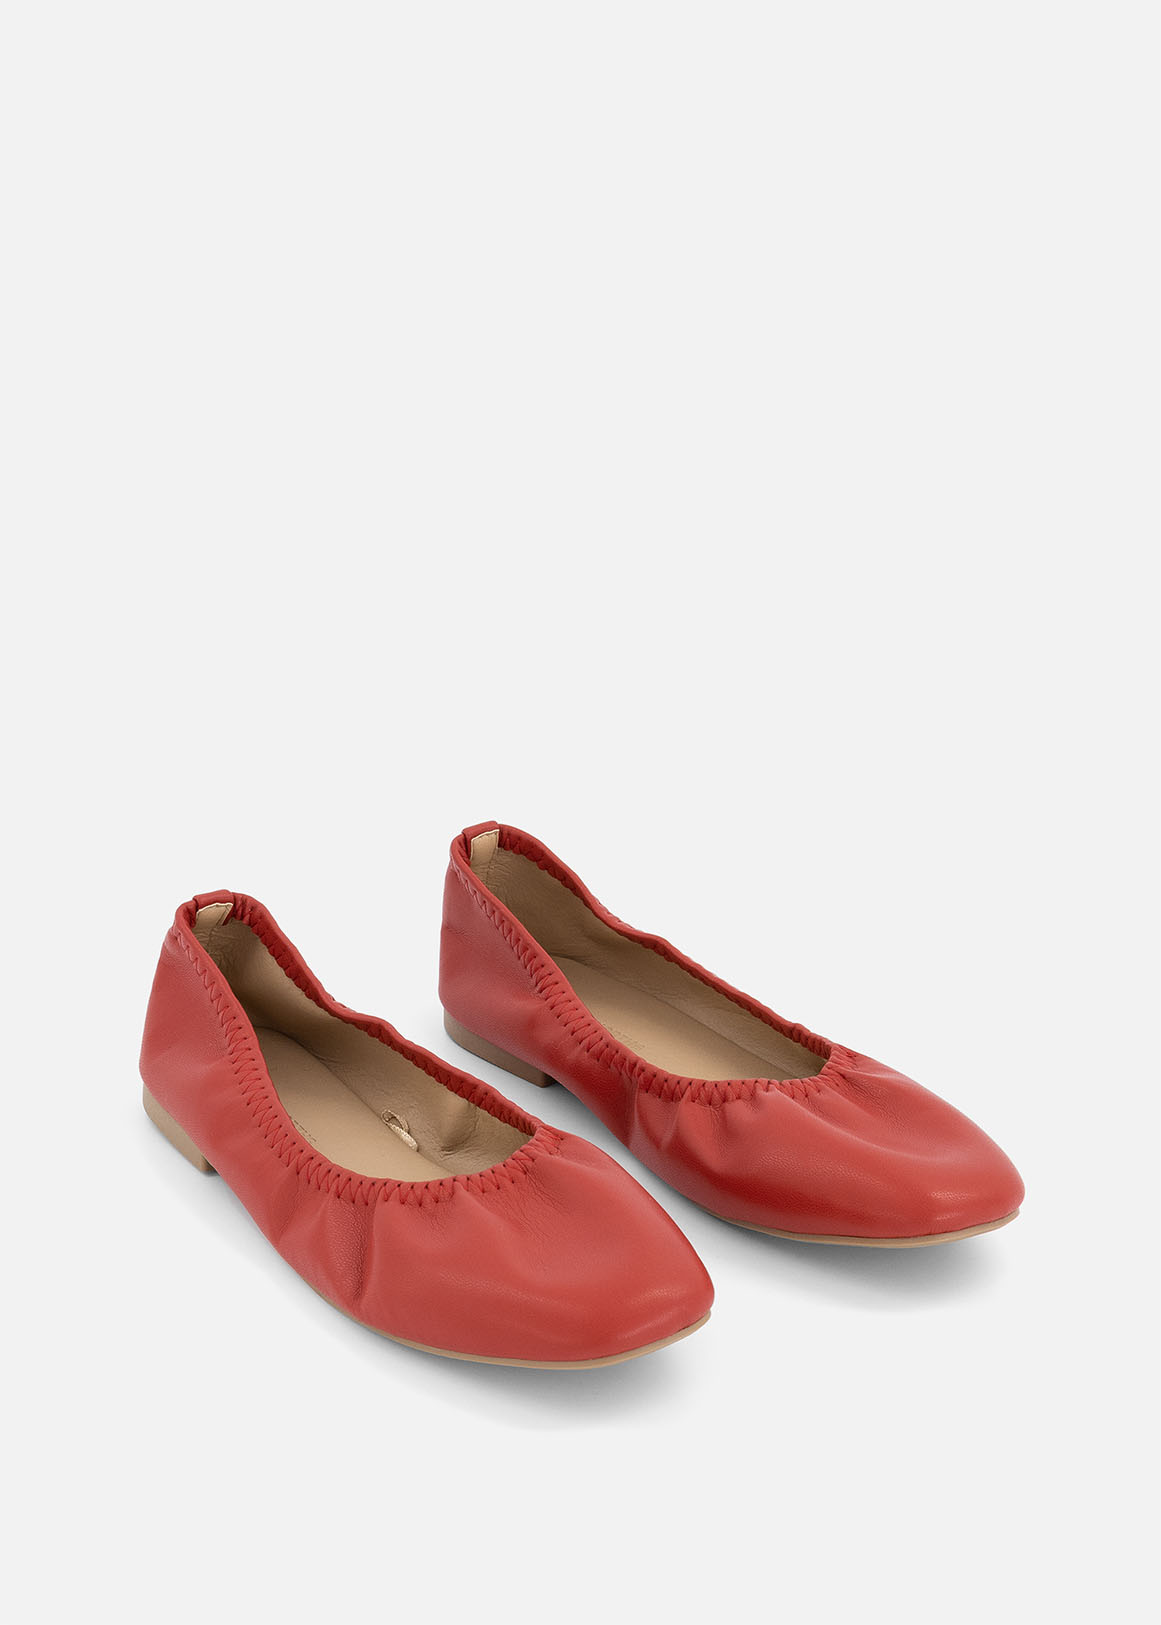 womens shoes for red dress